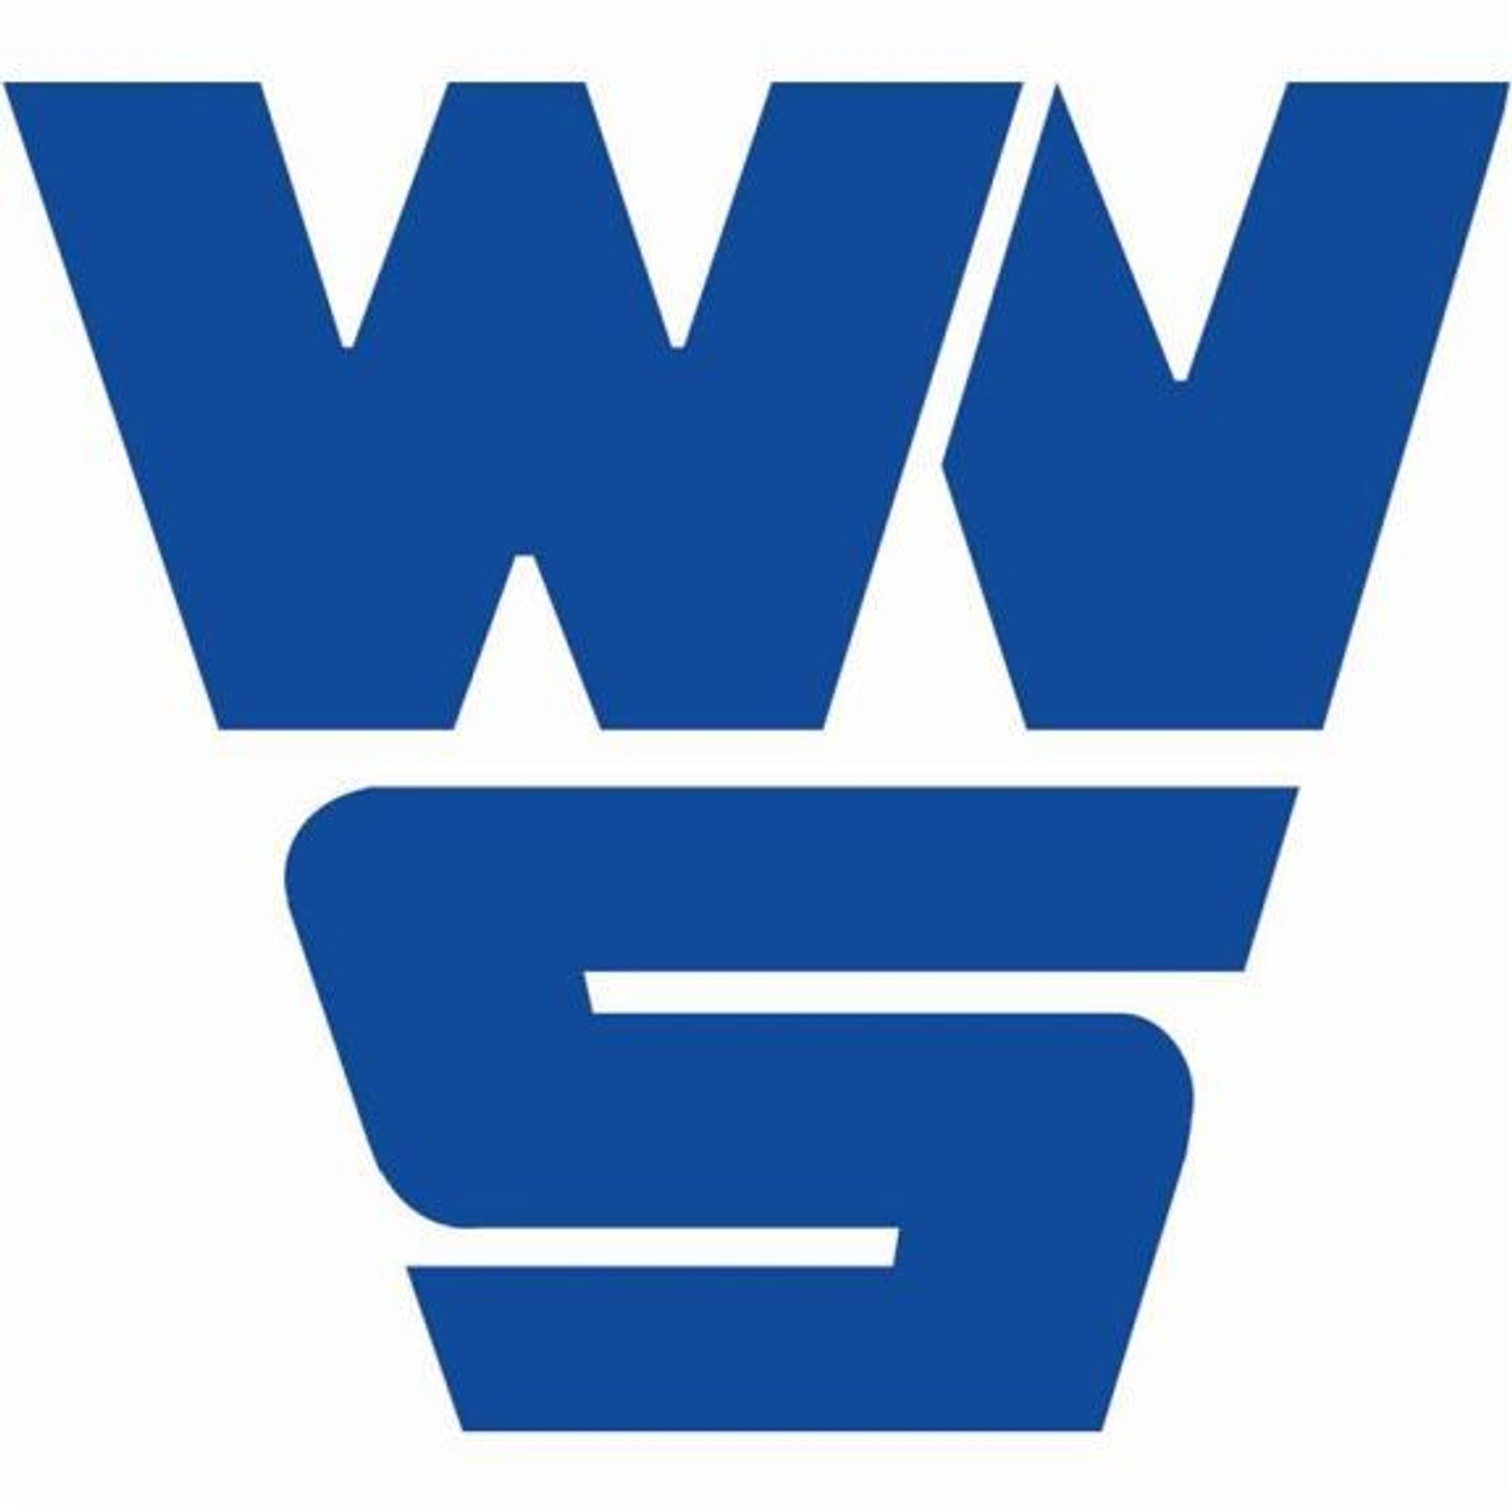 Westvlaamse Steencentrale S.A. logo